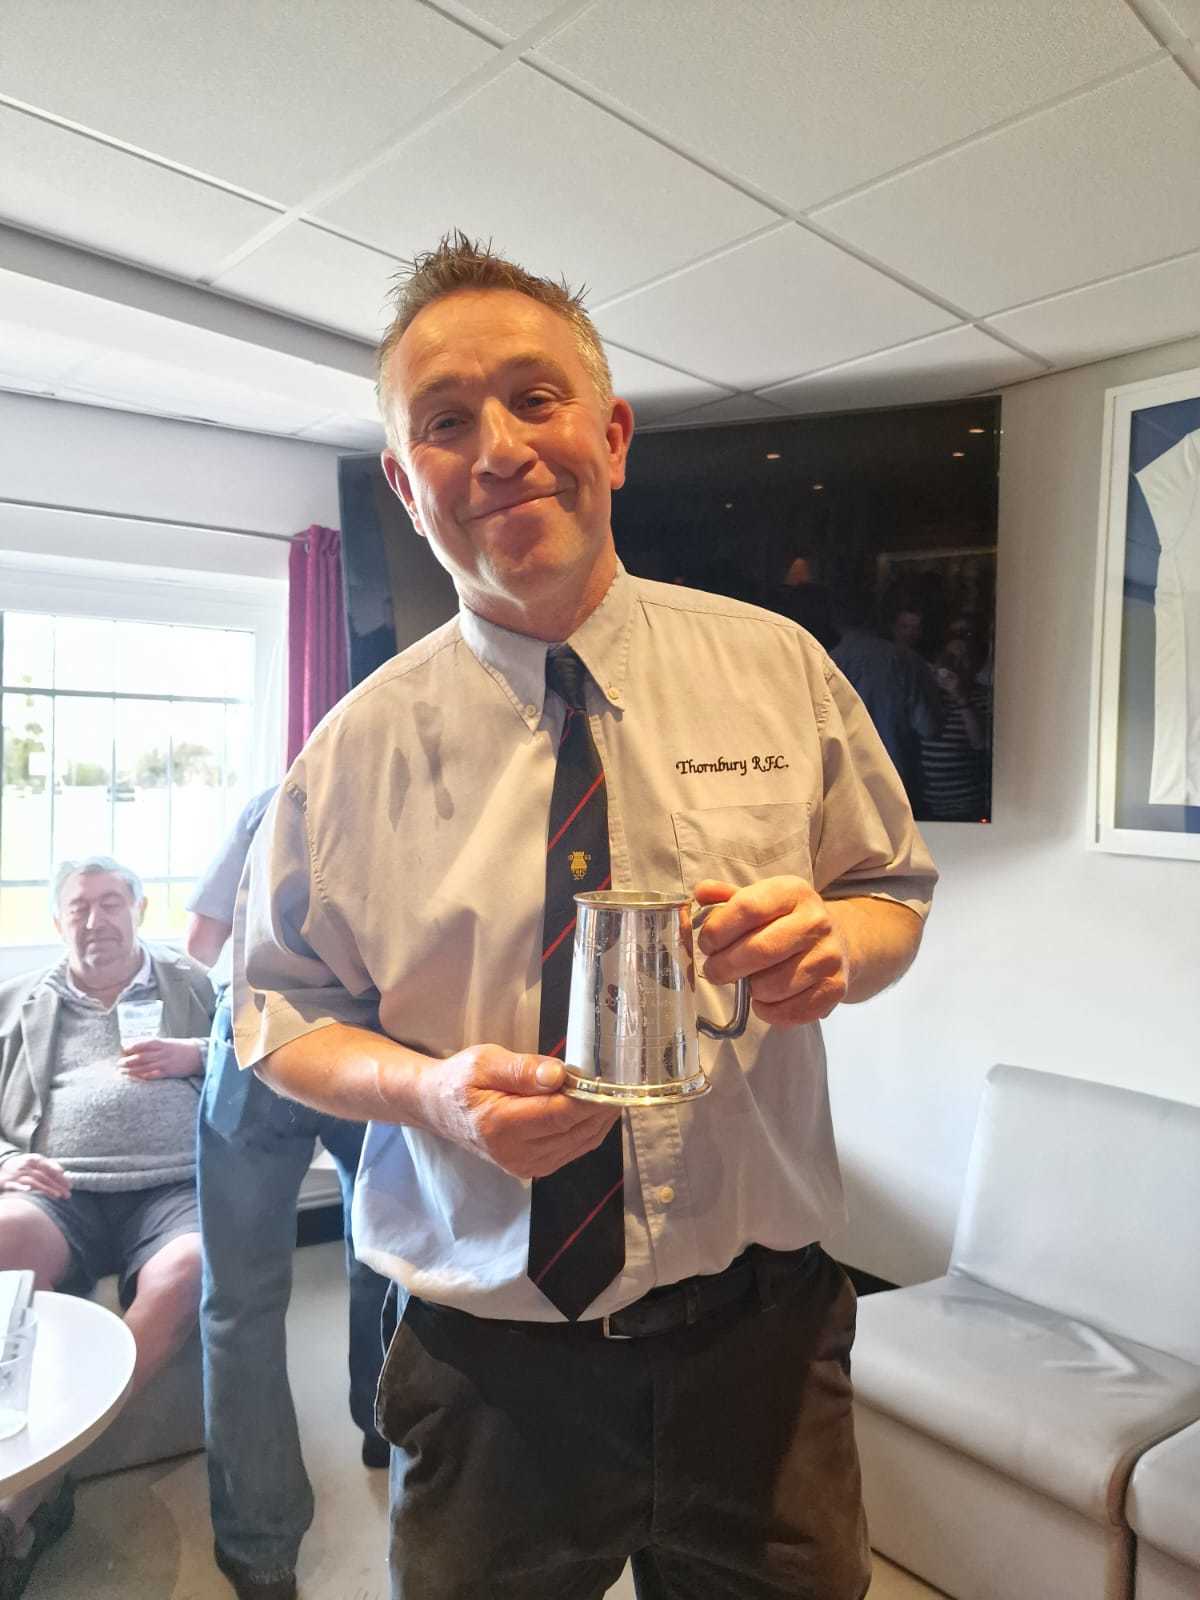 of Jon Pullin with the tankard presented to him on having played 600 senior games for the club